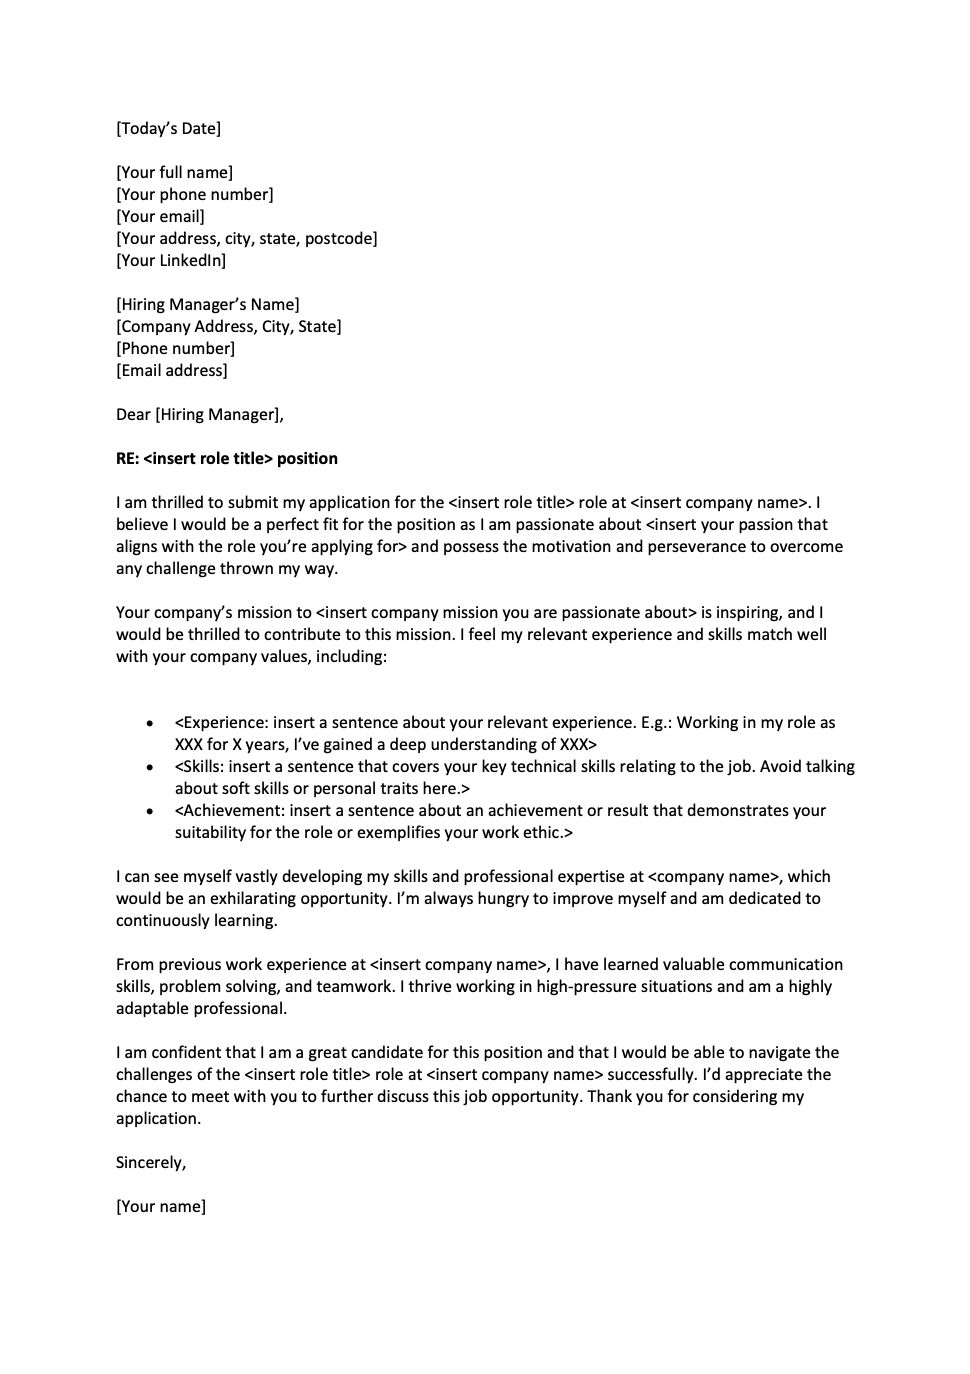 download word cover letter template